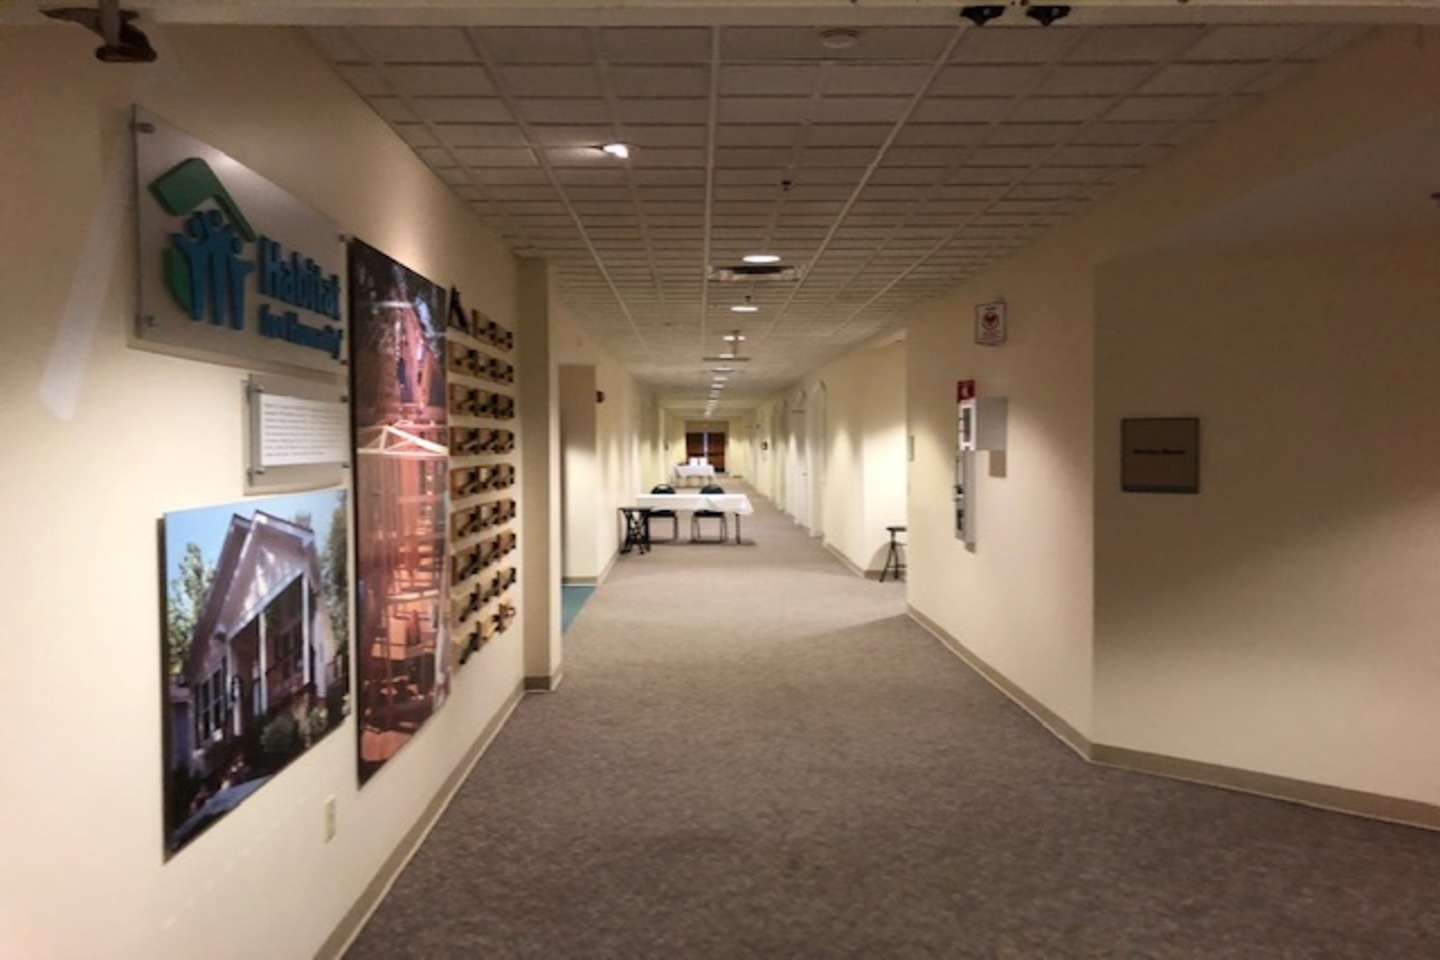 Walk the Long hallway, Room on Left, end of the Line